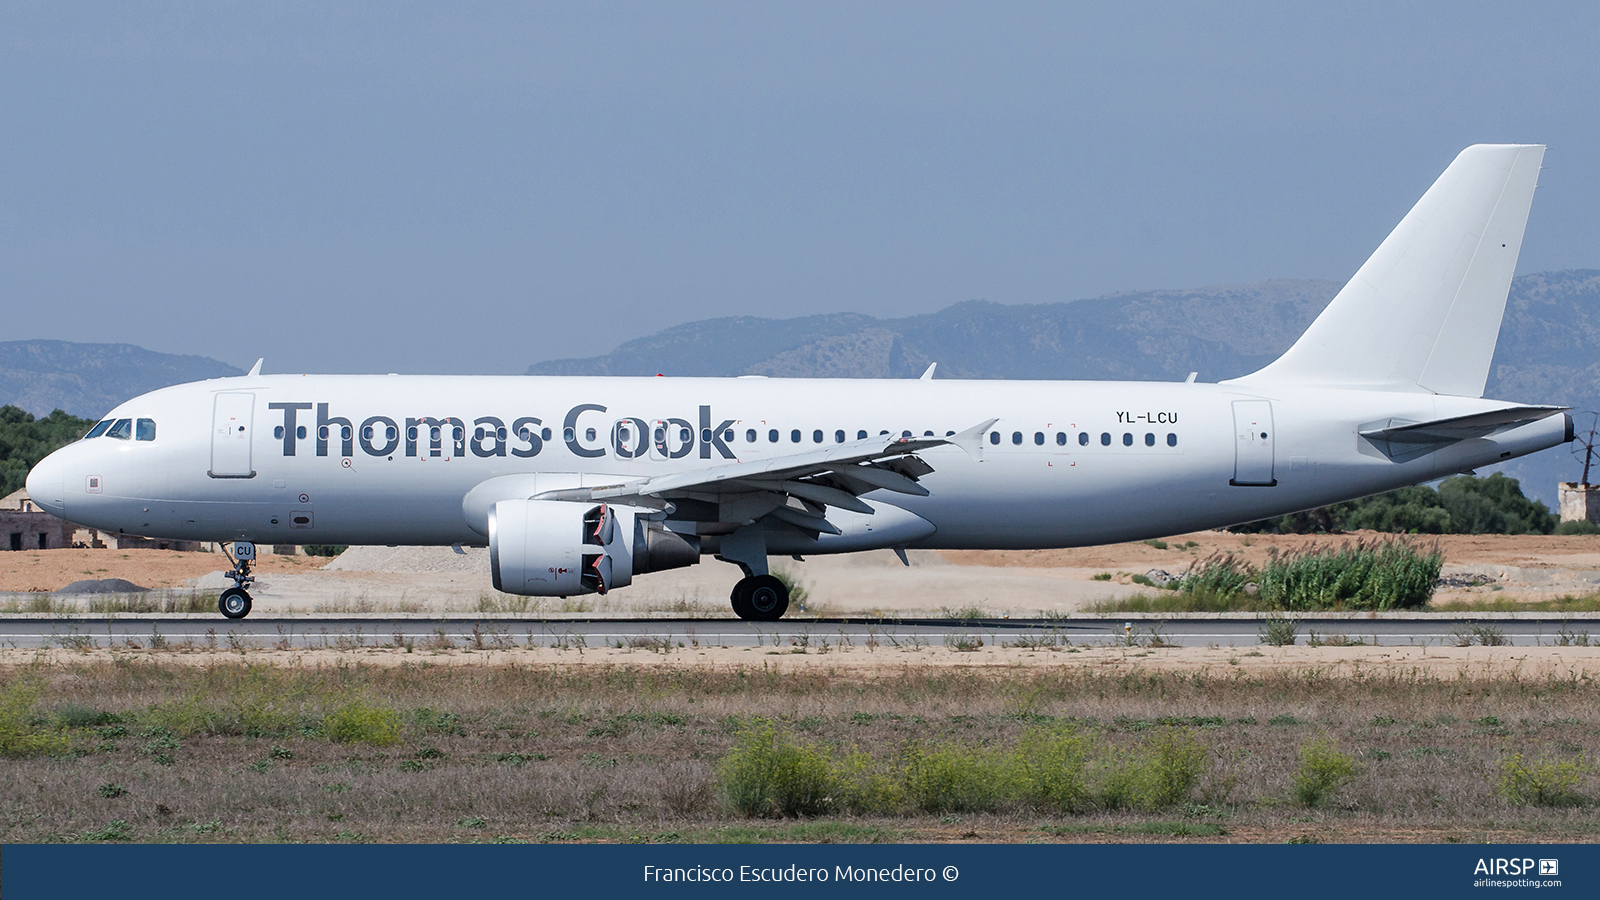 Thomas Cook Airlines  Airbus A320  YL-LCU